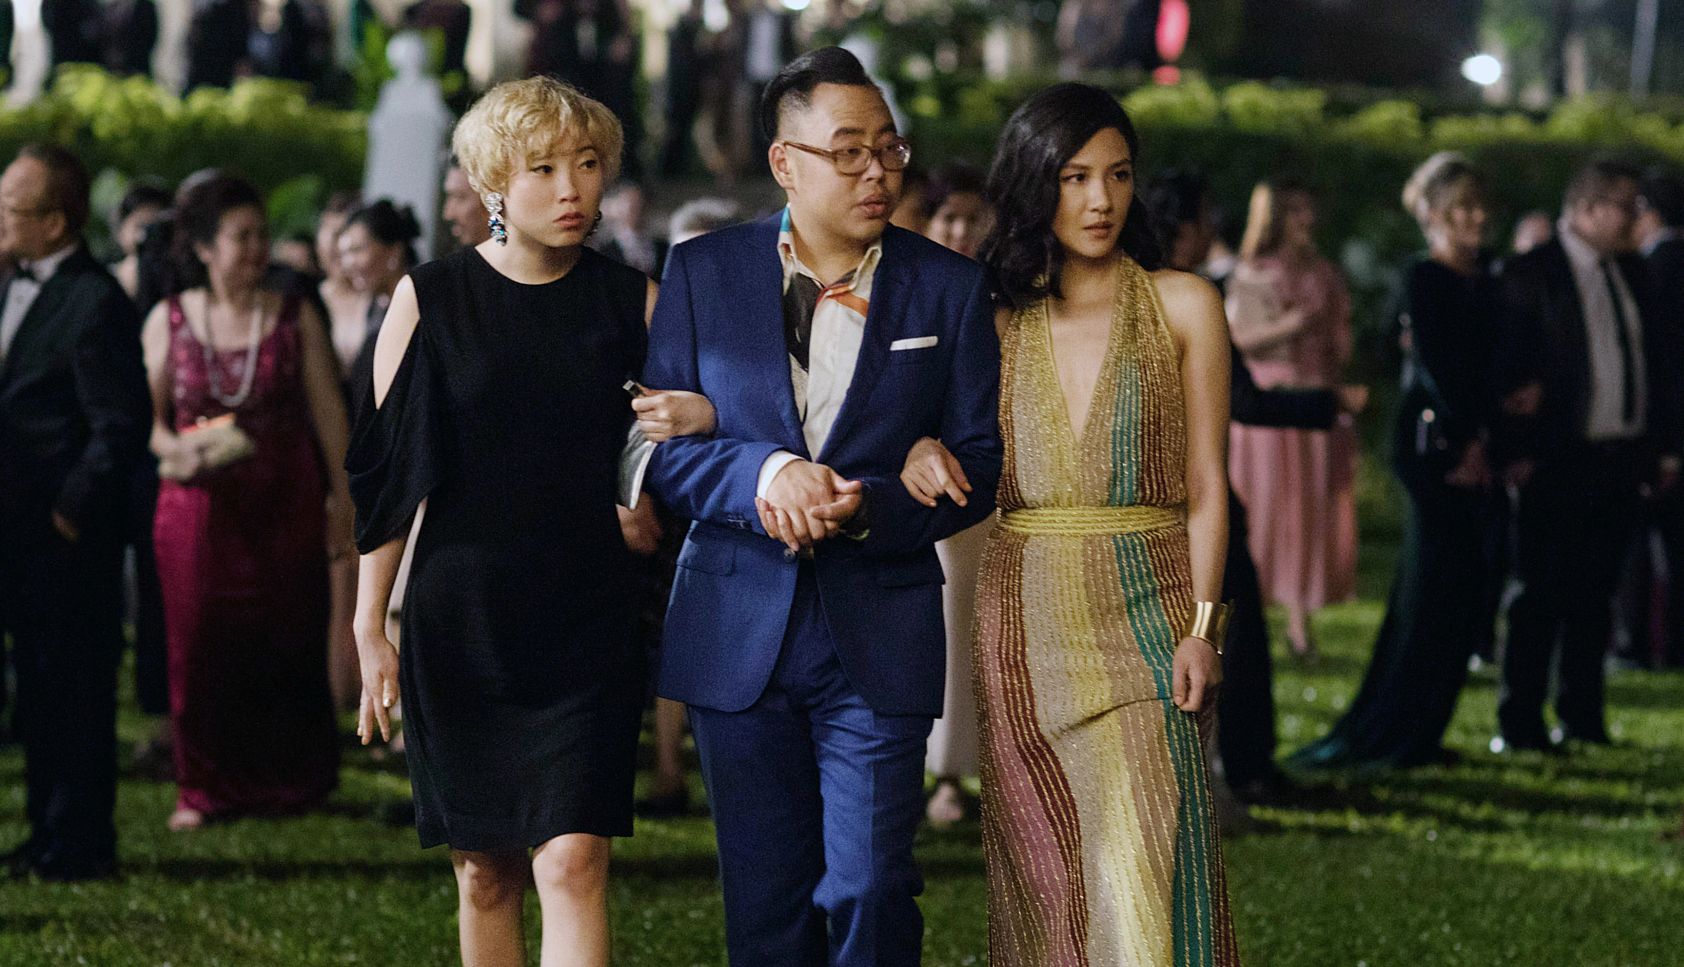 Awkwafina, Nico Santos and Constance Wu in a still from Crazy Rich Asians